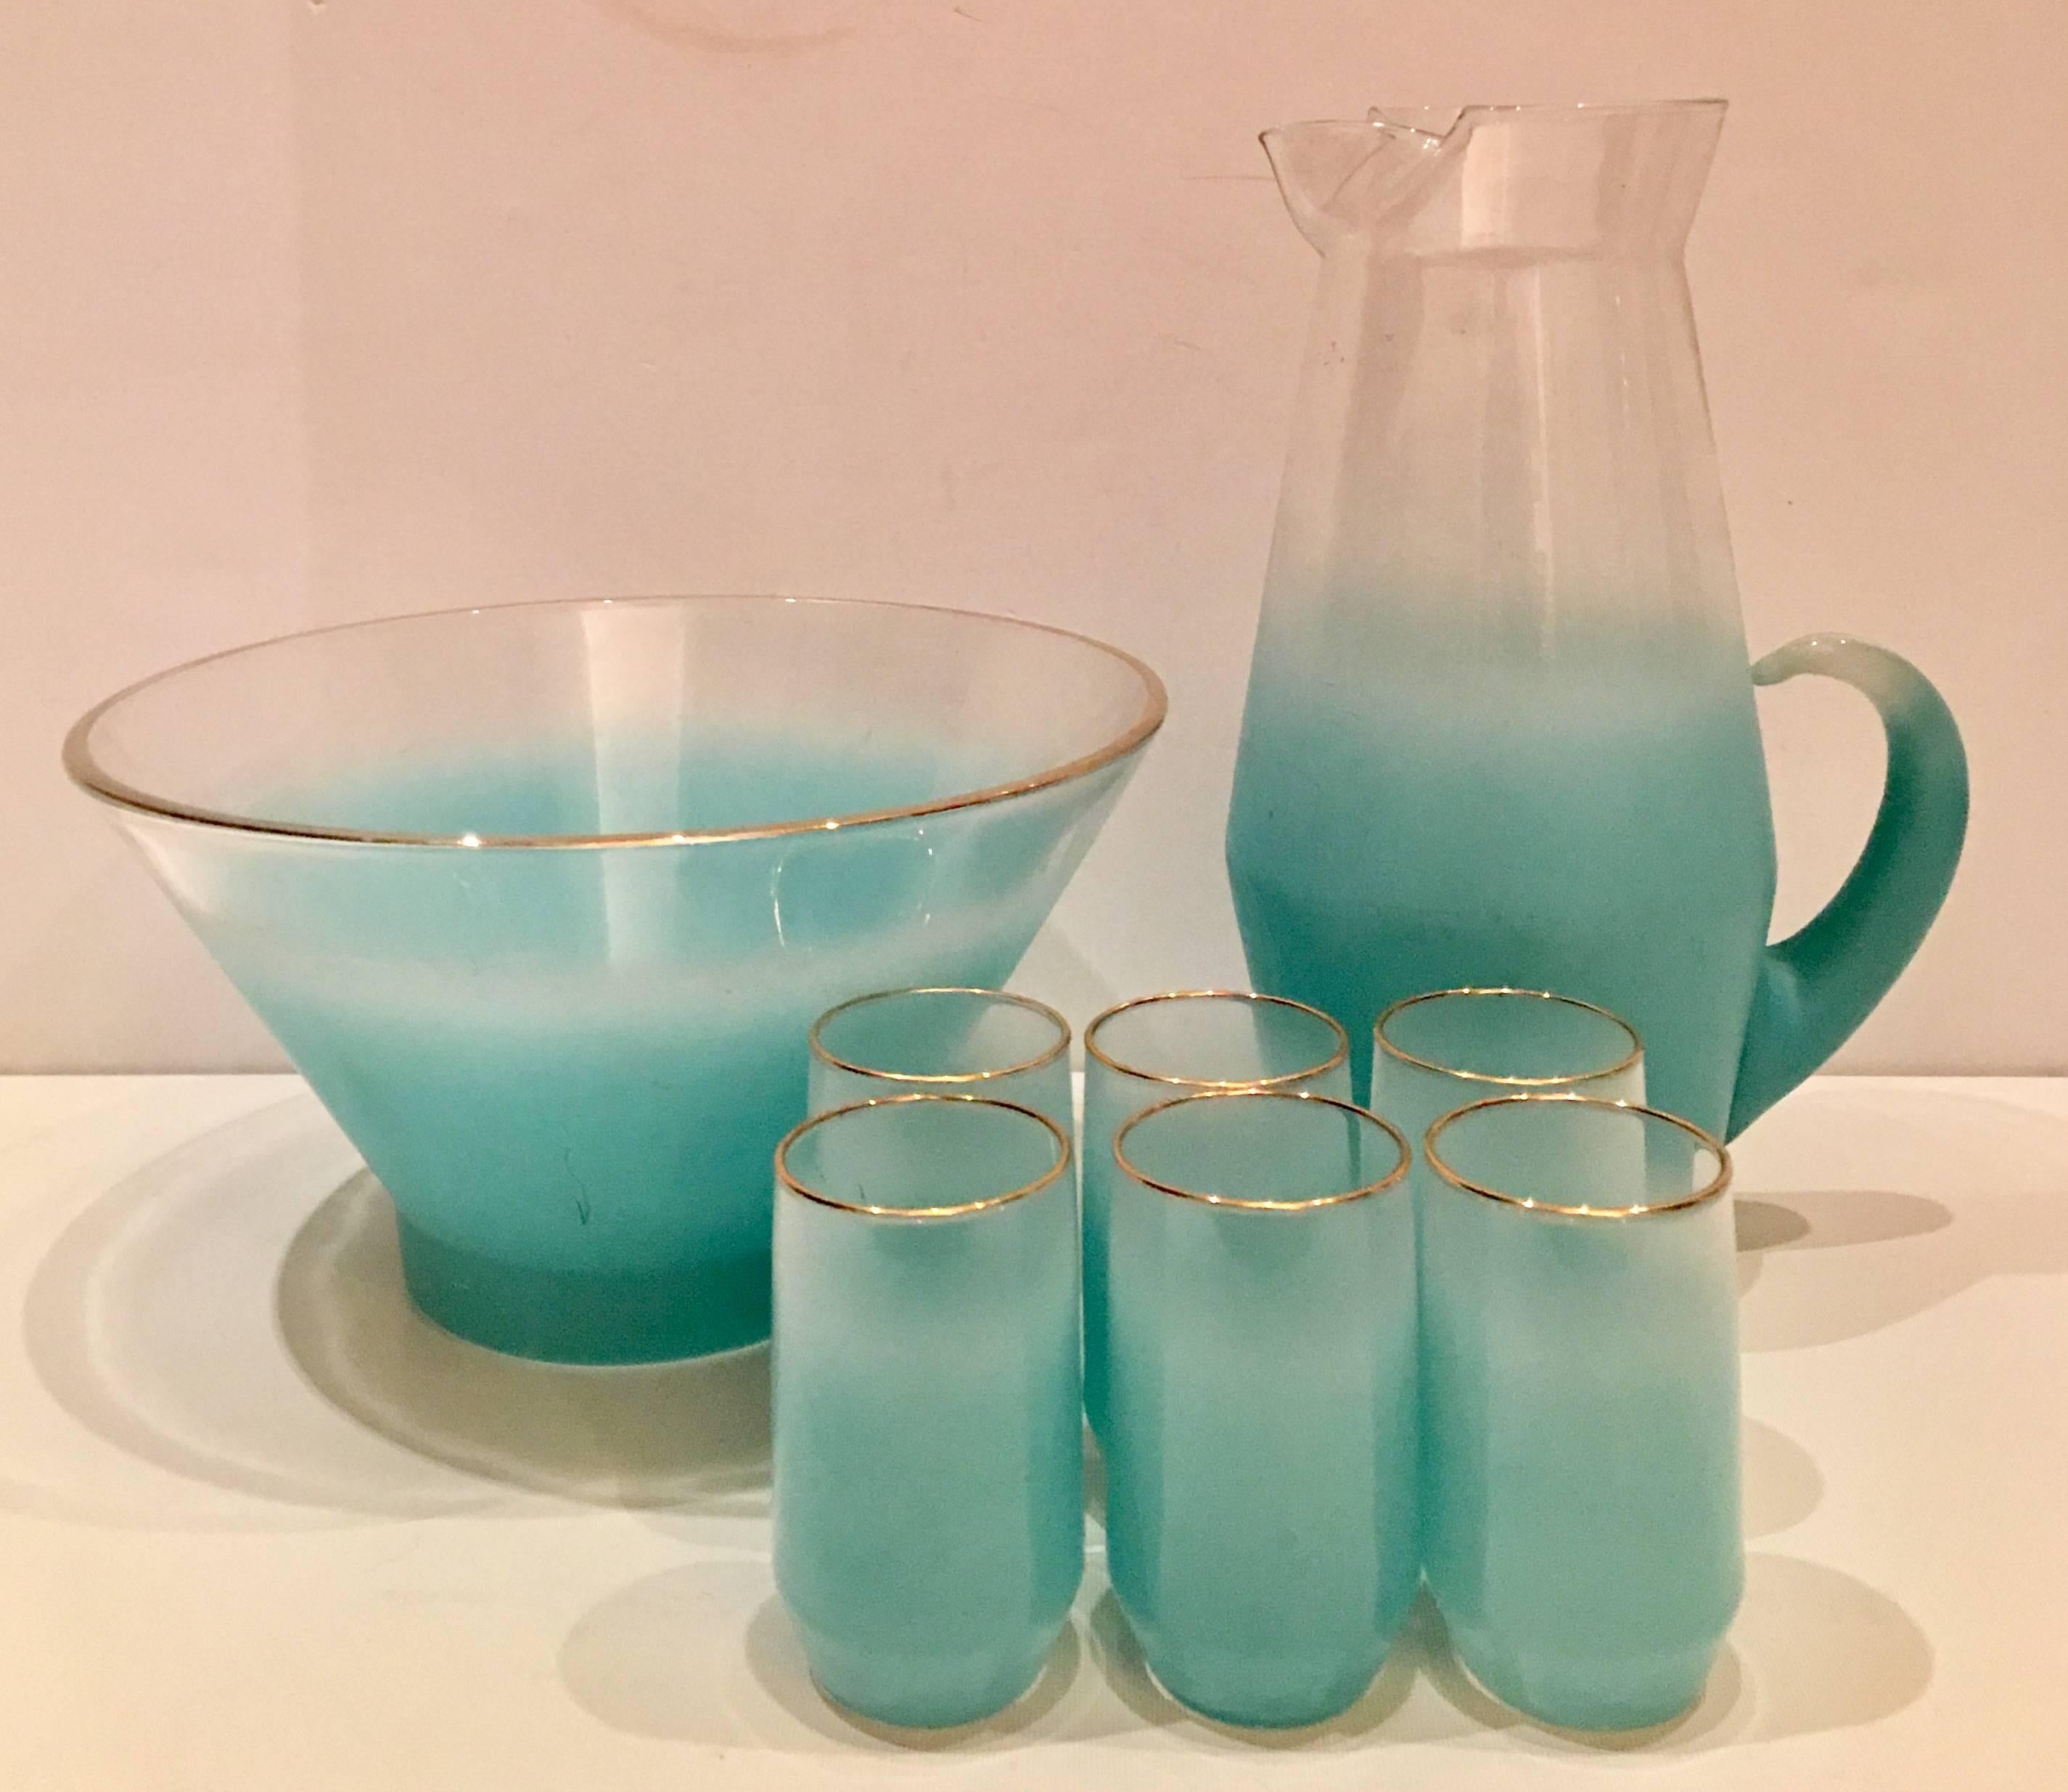 1960s Blendo glass frosted turquoise and 22-karat gold trim detail drinks set of eight pieces. This set features, one large bowl, one handled pitcher and six drink glasses. Each glass measures: 4" H x 2.13" diameter. Large bowl measures,